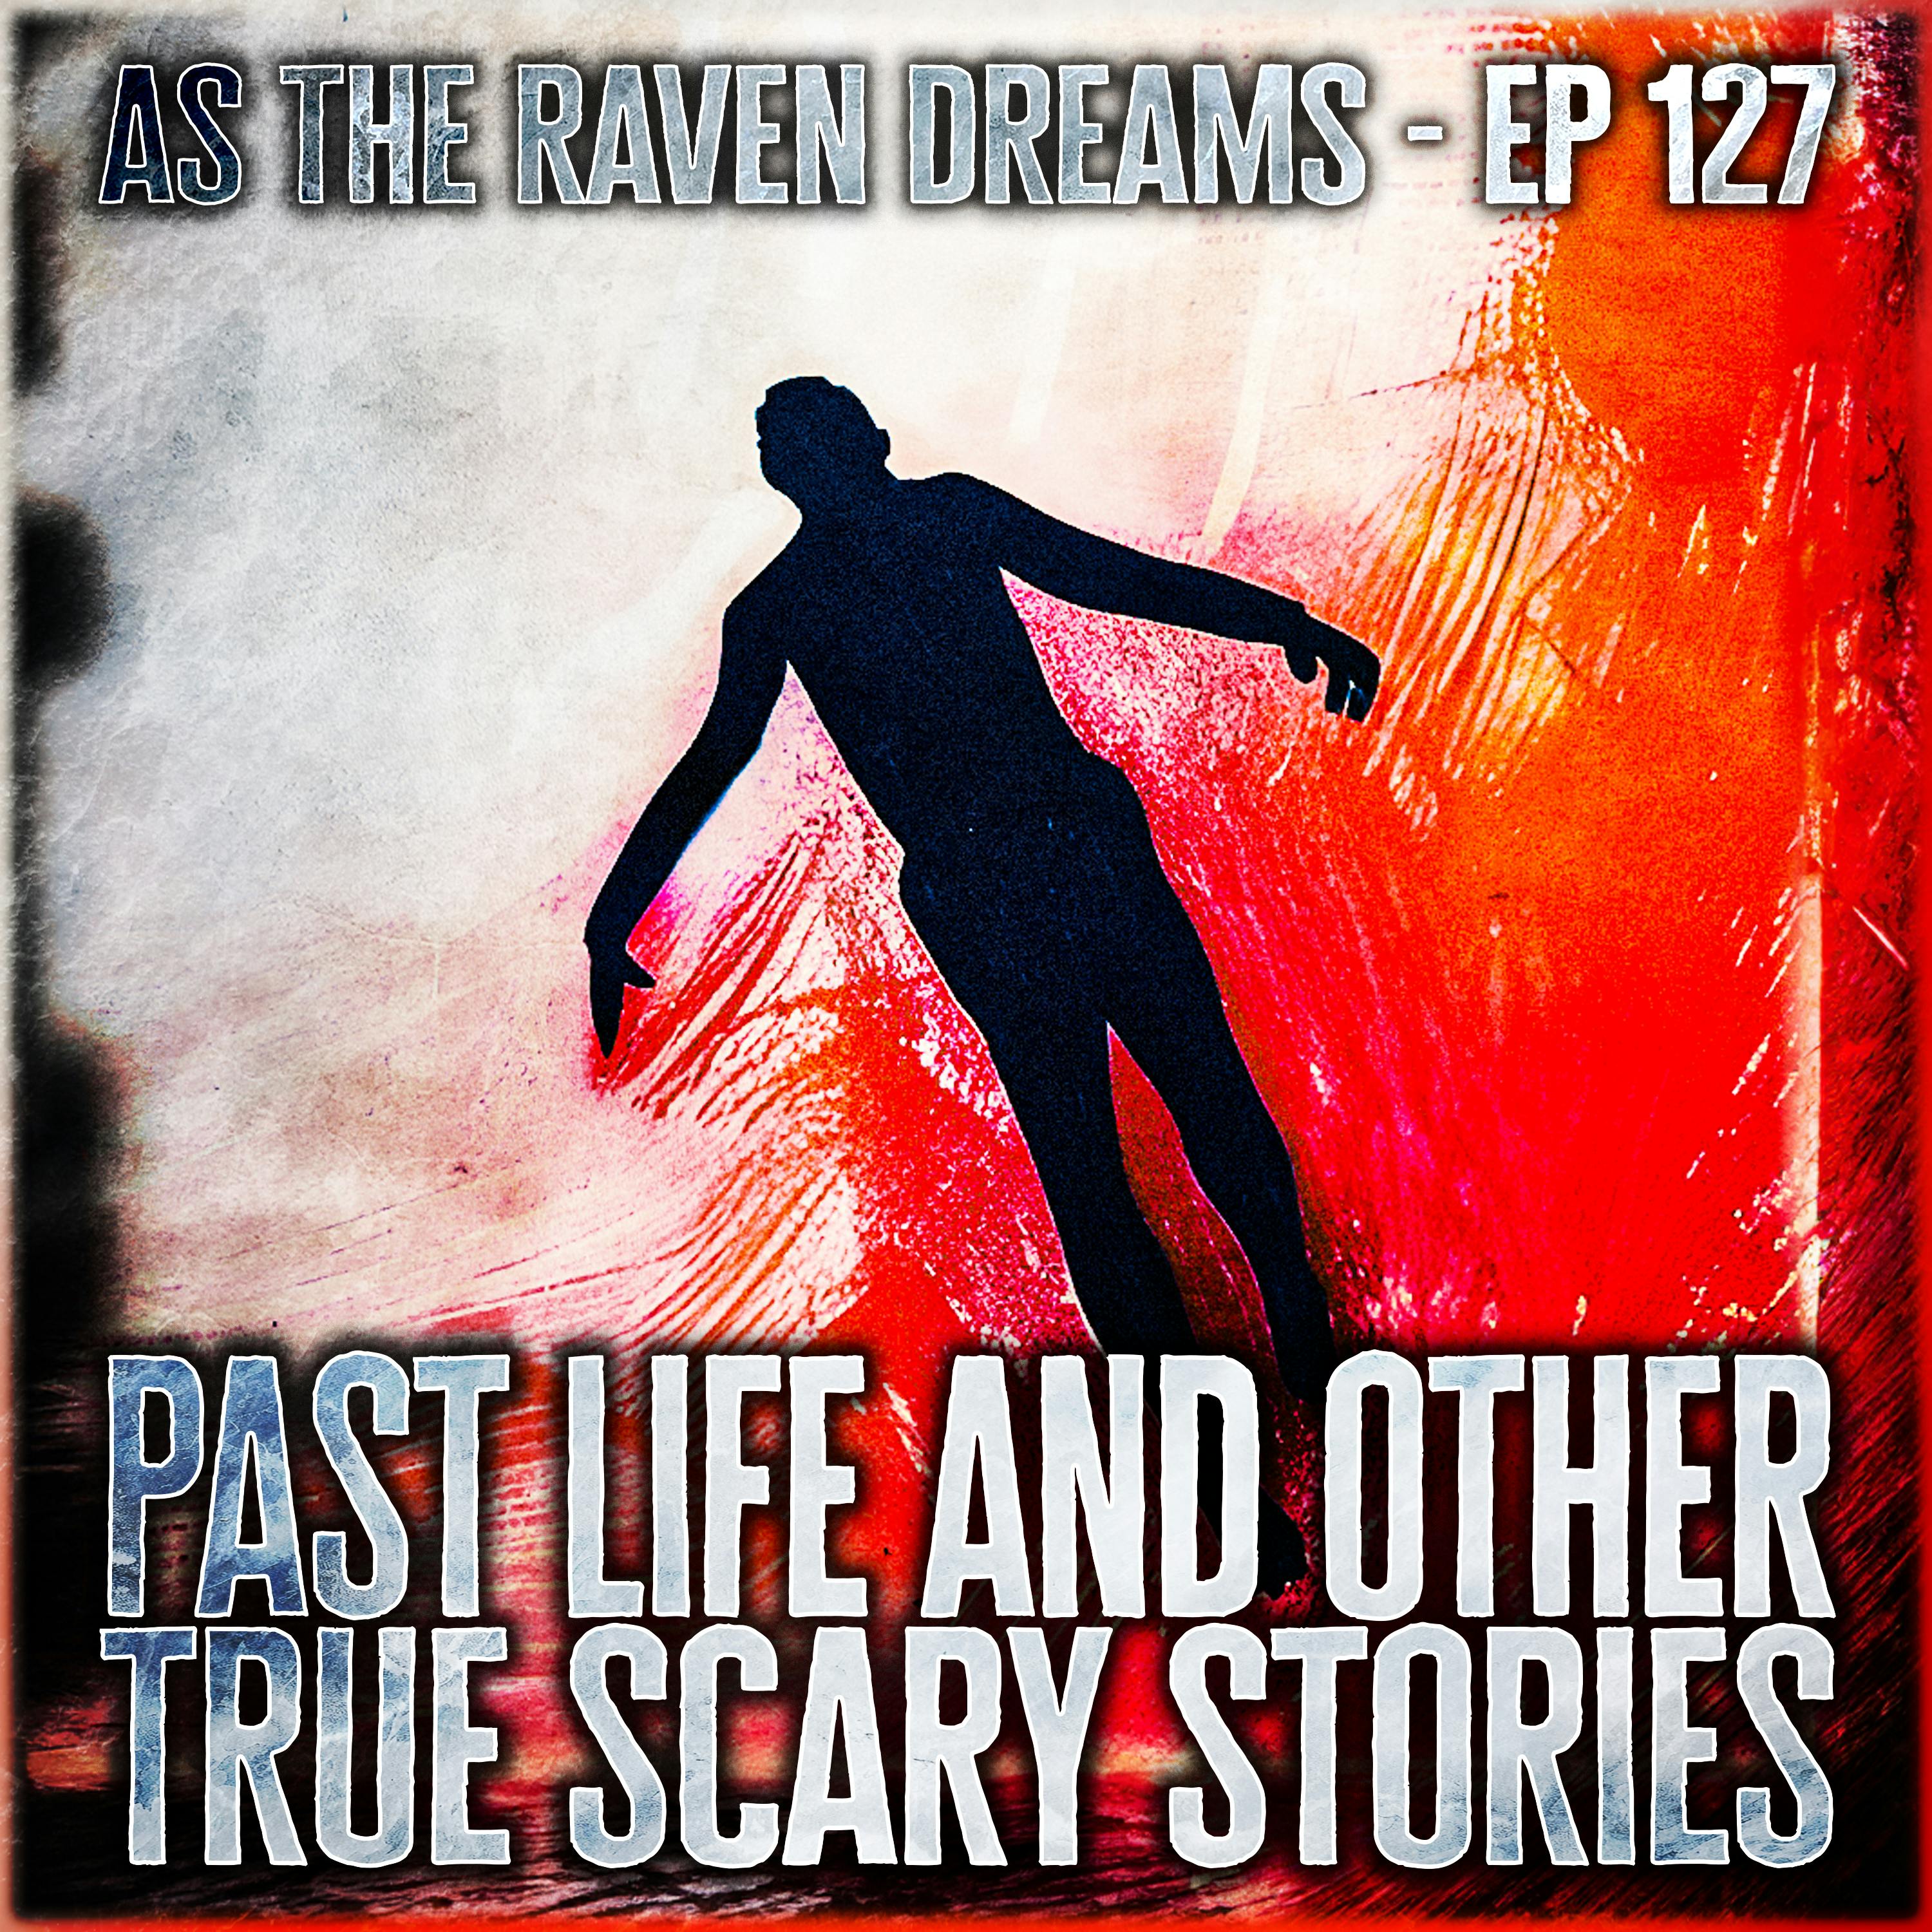 ATRD Ep. 127 - Chilling Past Life & Other True Scary Stories - 16 True Scary Stories